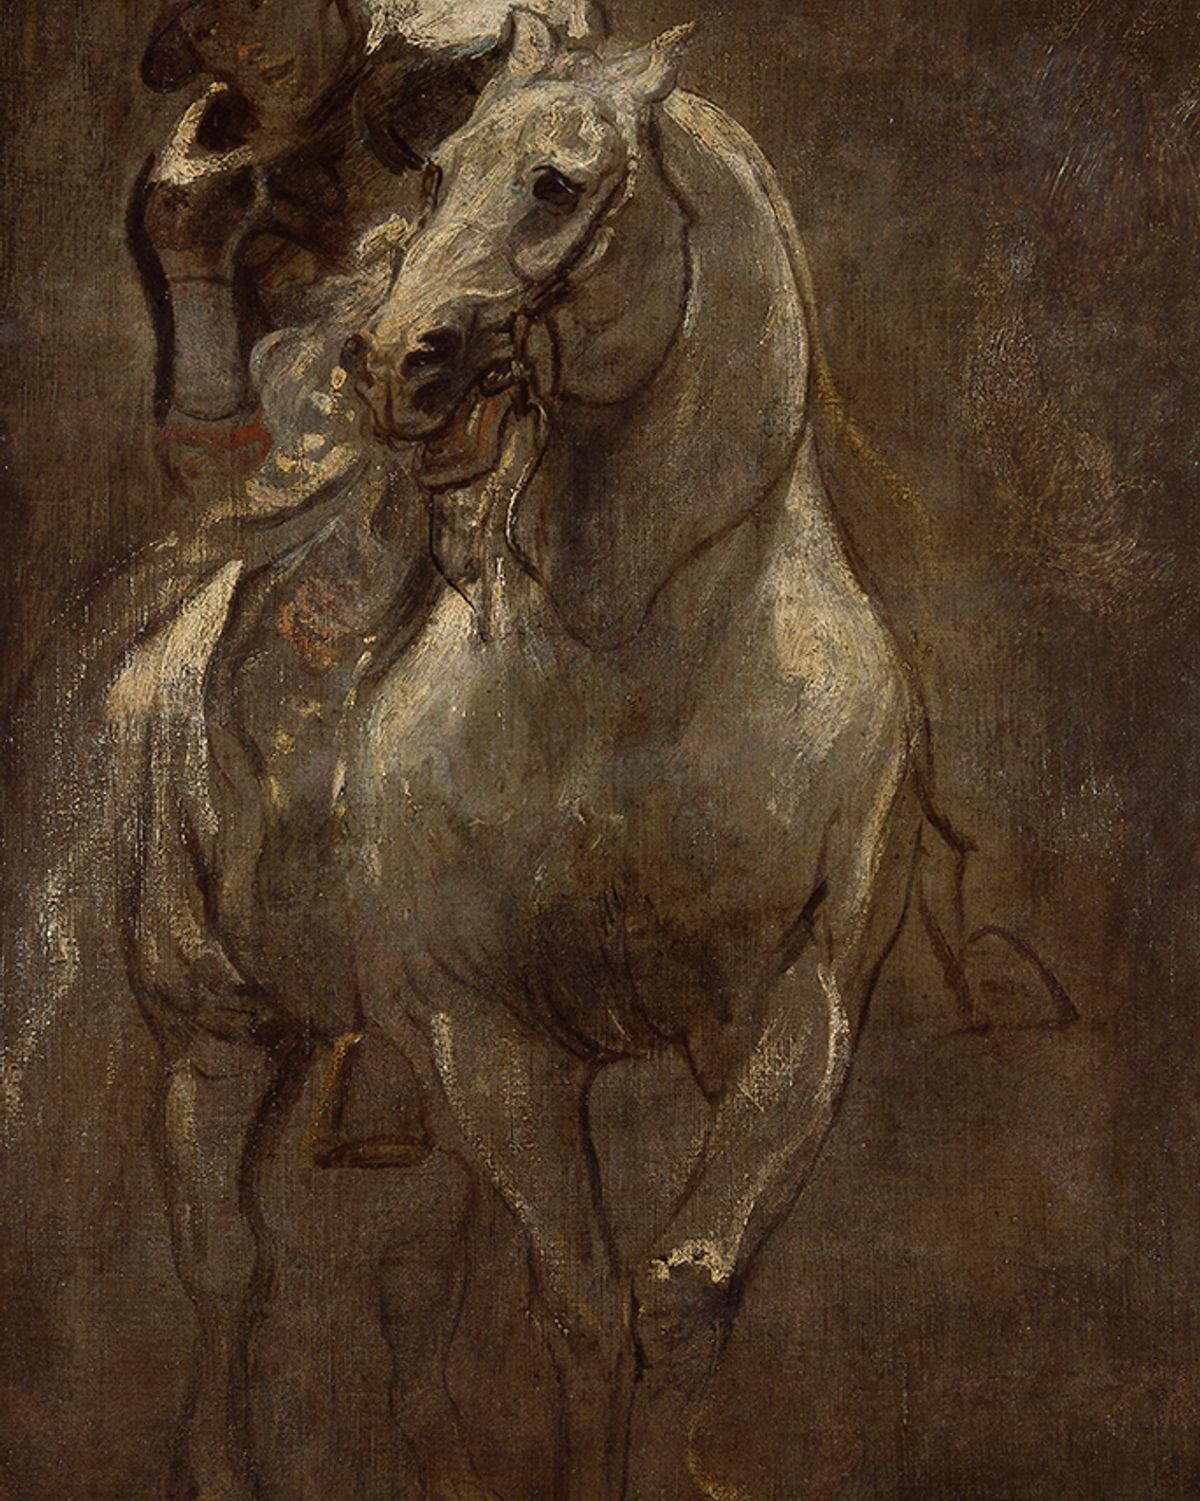 Antony Van Dyck's A Soldier on Horseback (around 1616) Courtesy of Thames Valley Police